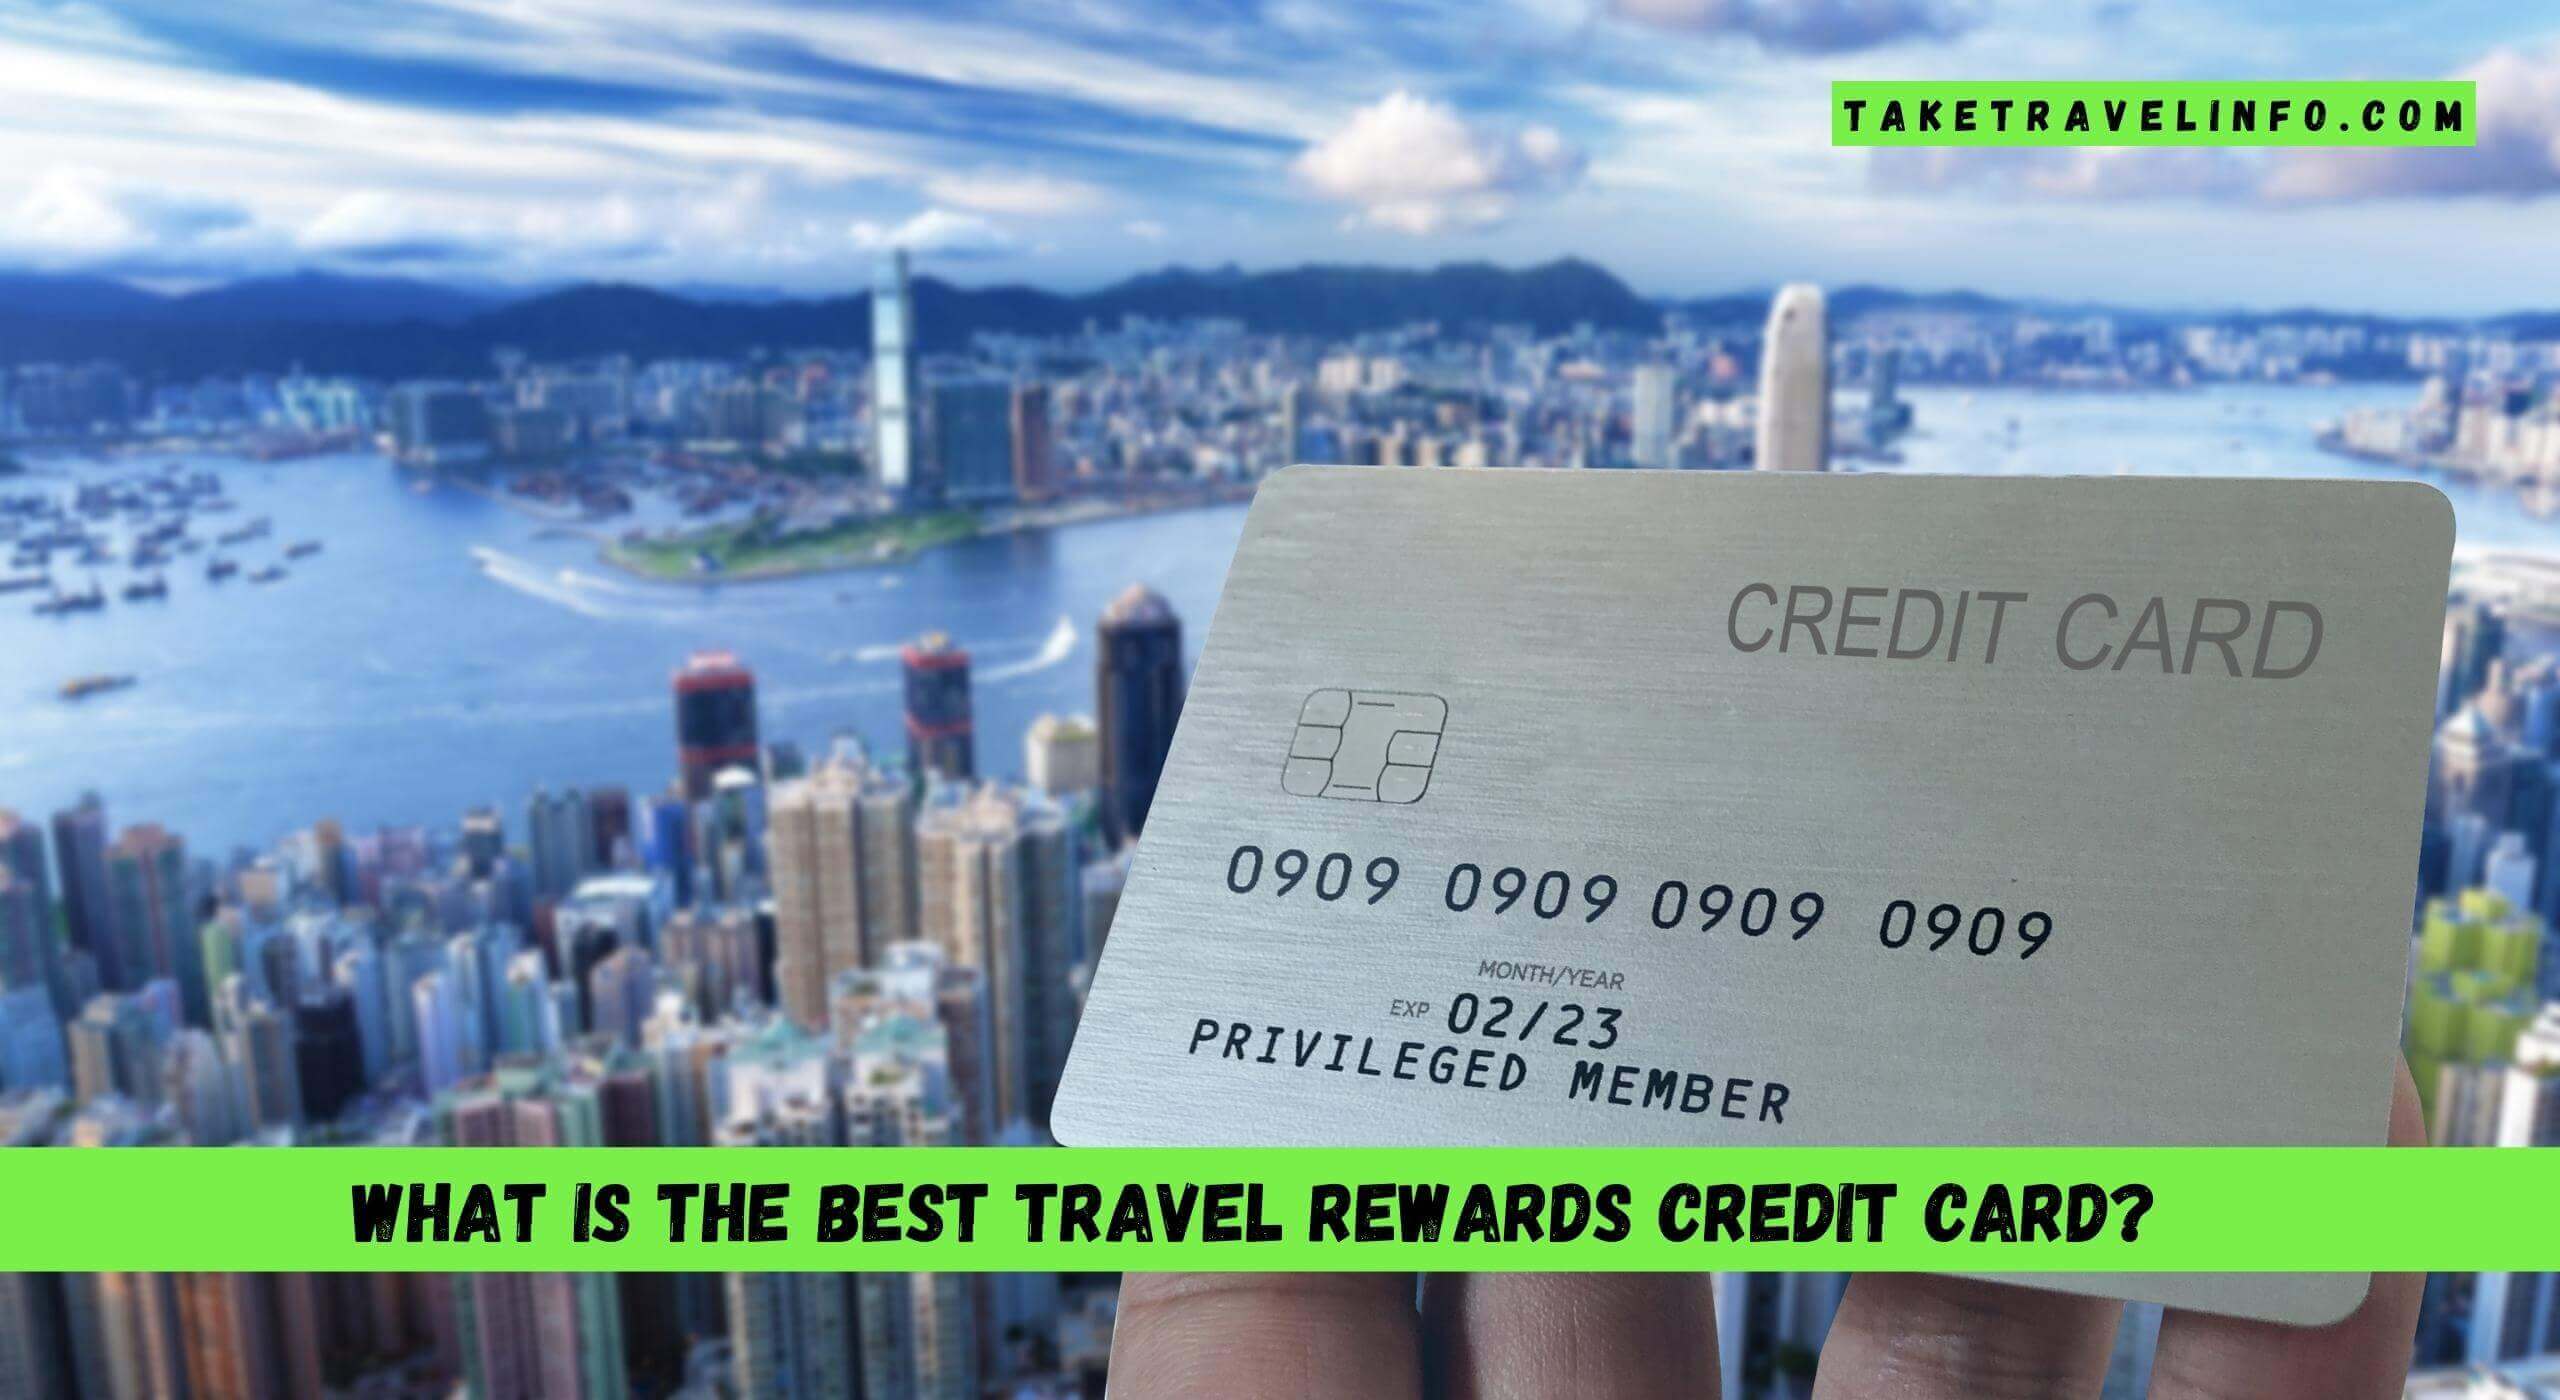 What Is The Best Travel Rewards Credit Card?